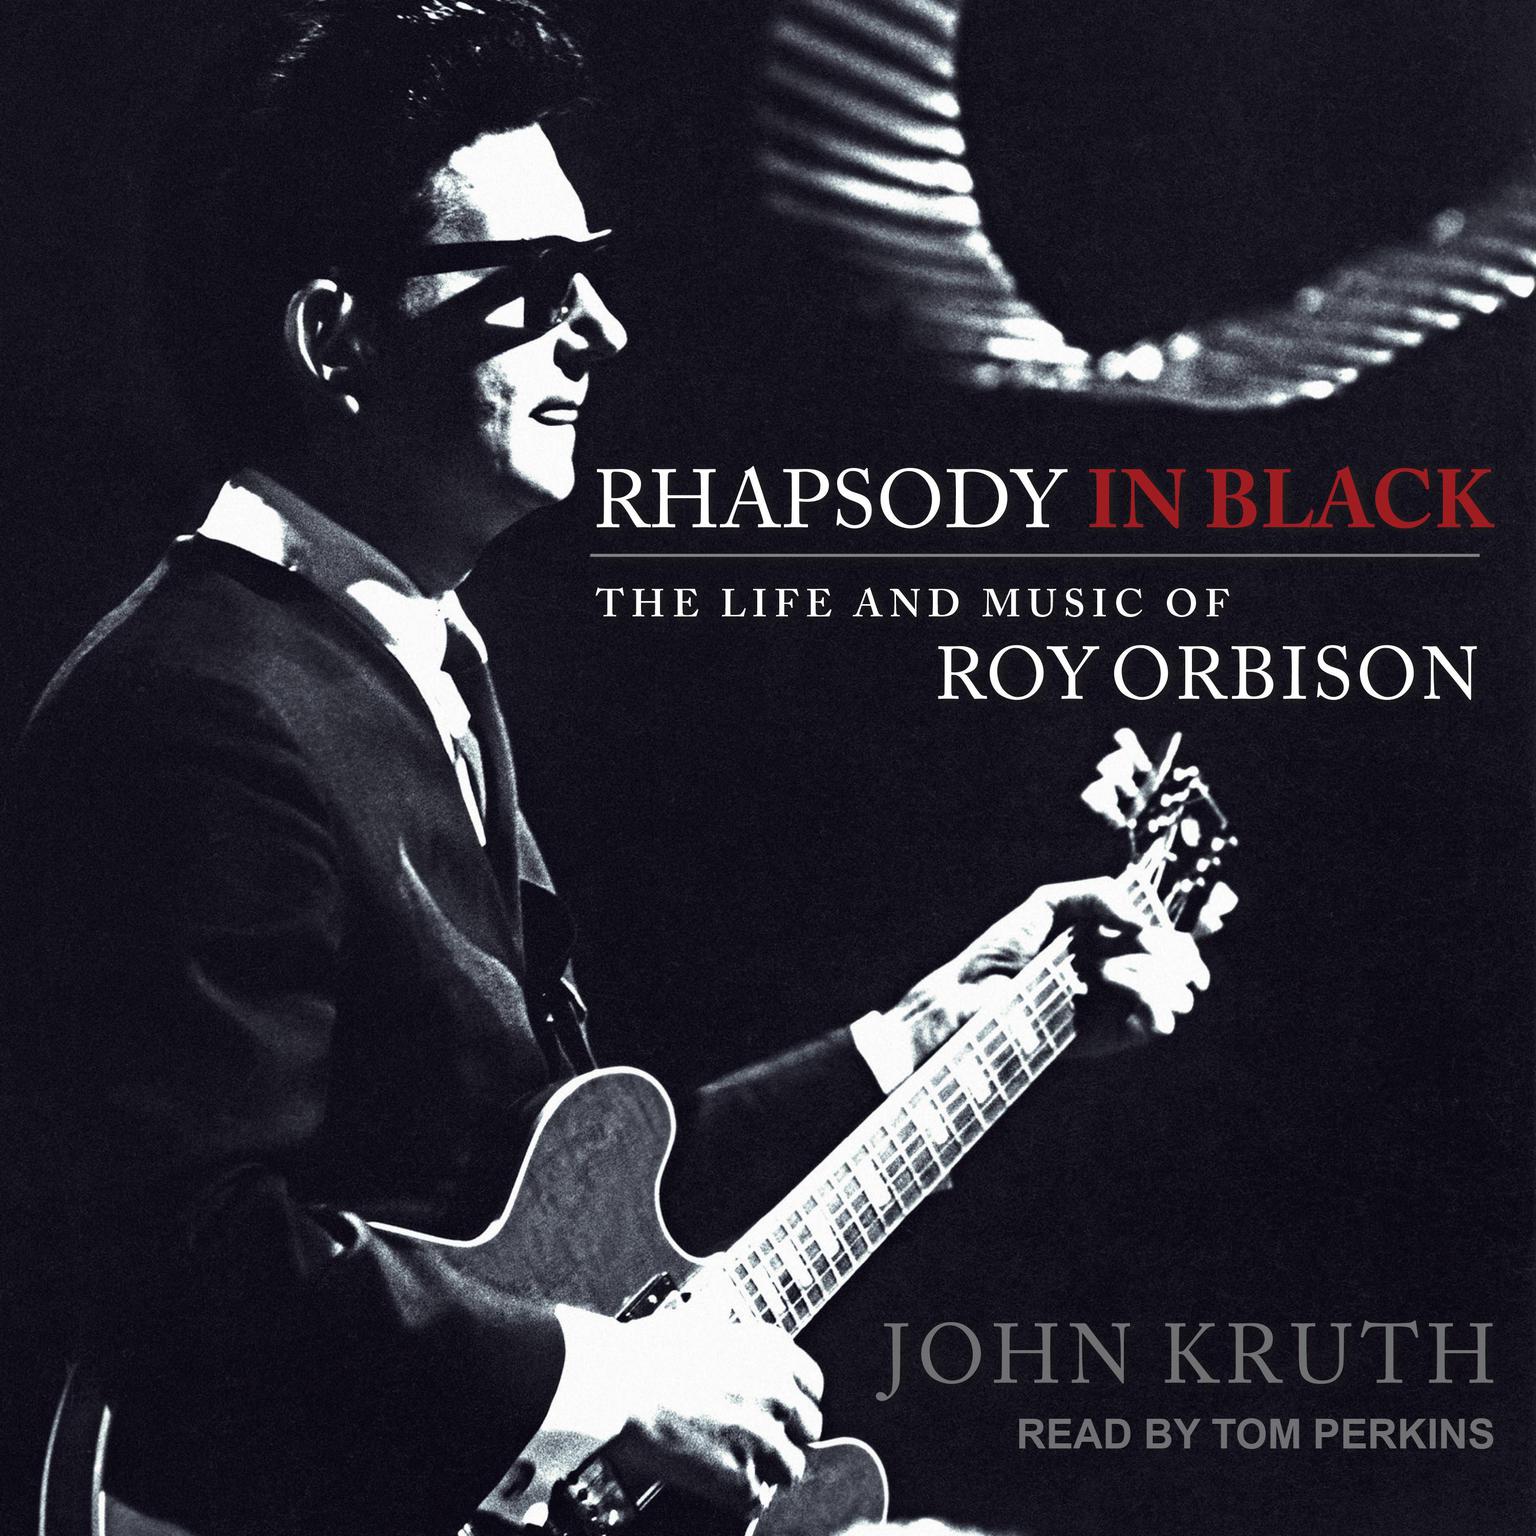 Rhapsody in Black: The Life and Music of Roy Orbison Audiobook, by John Kruth